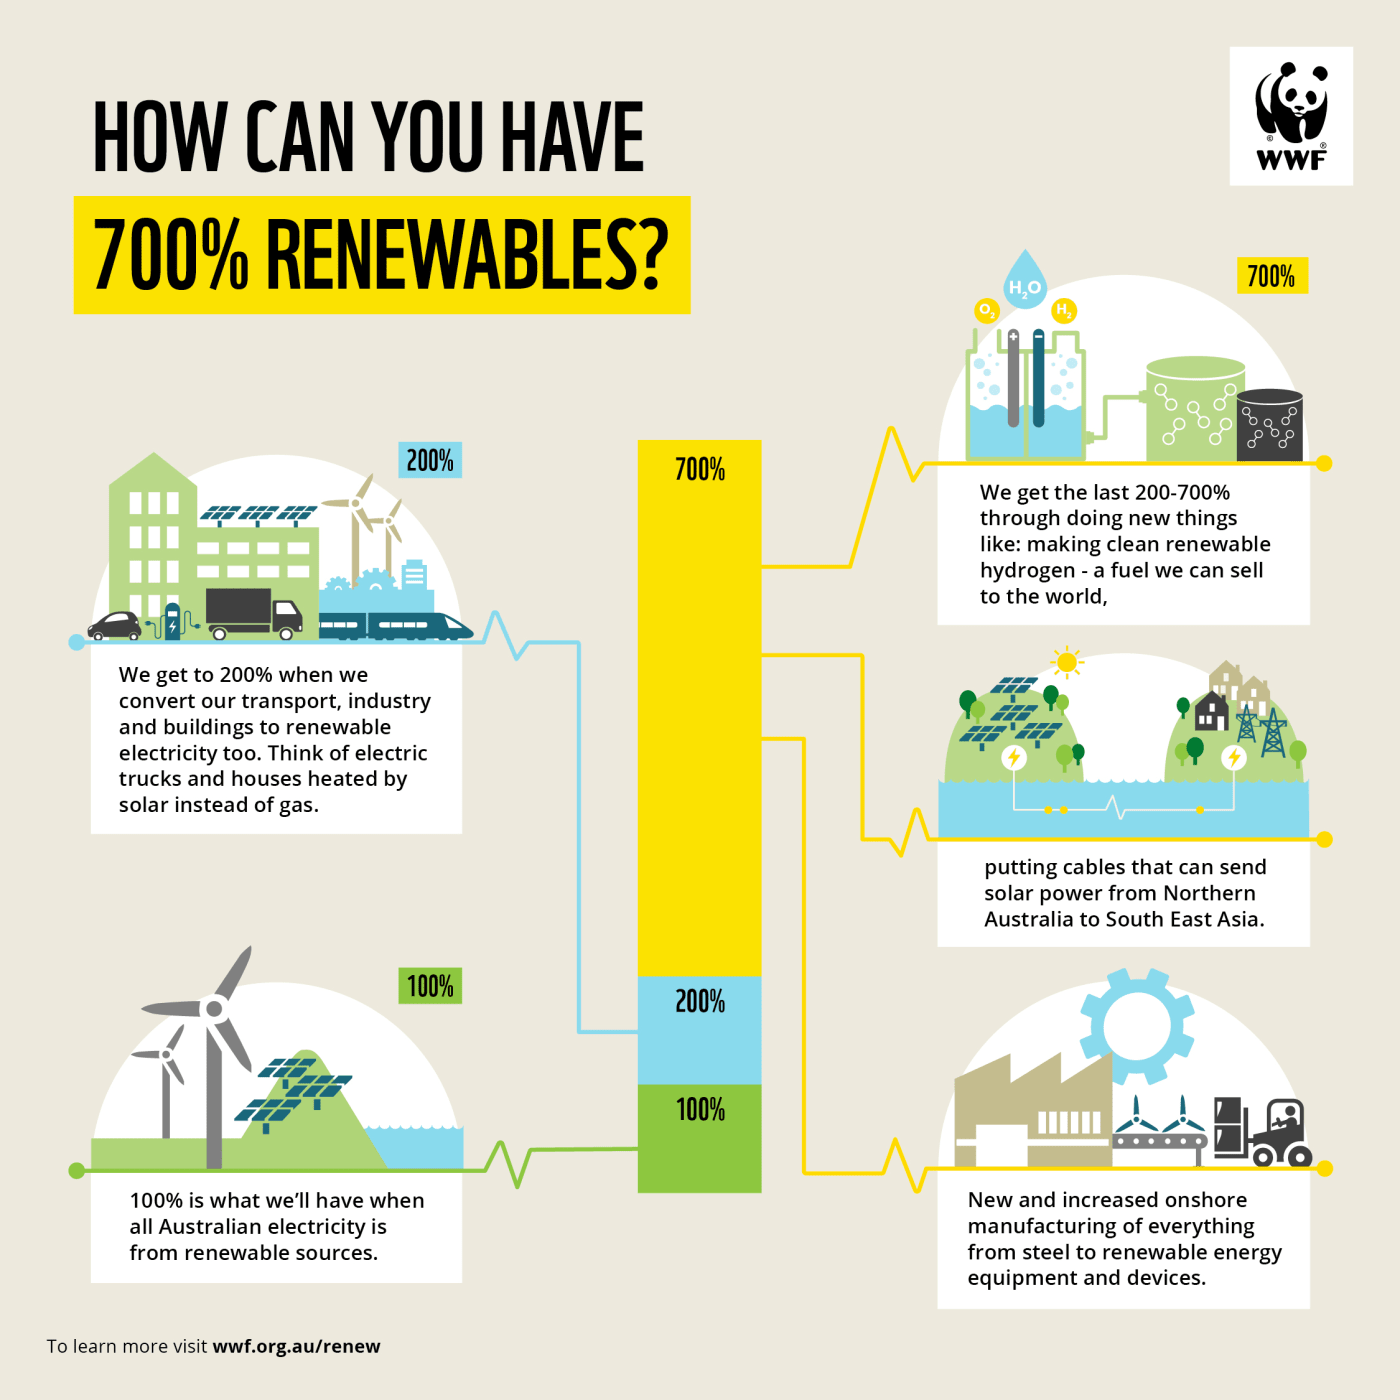 WWF infographic  - How can you have 700% renewables?